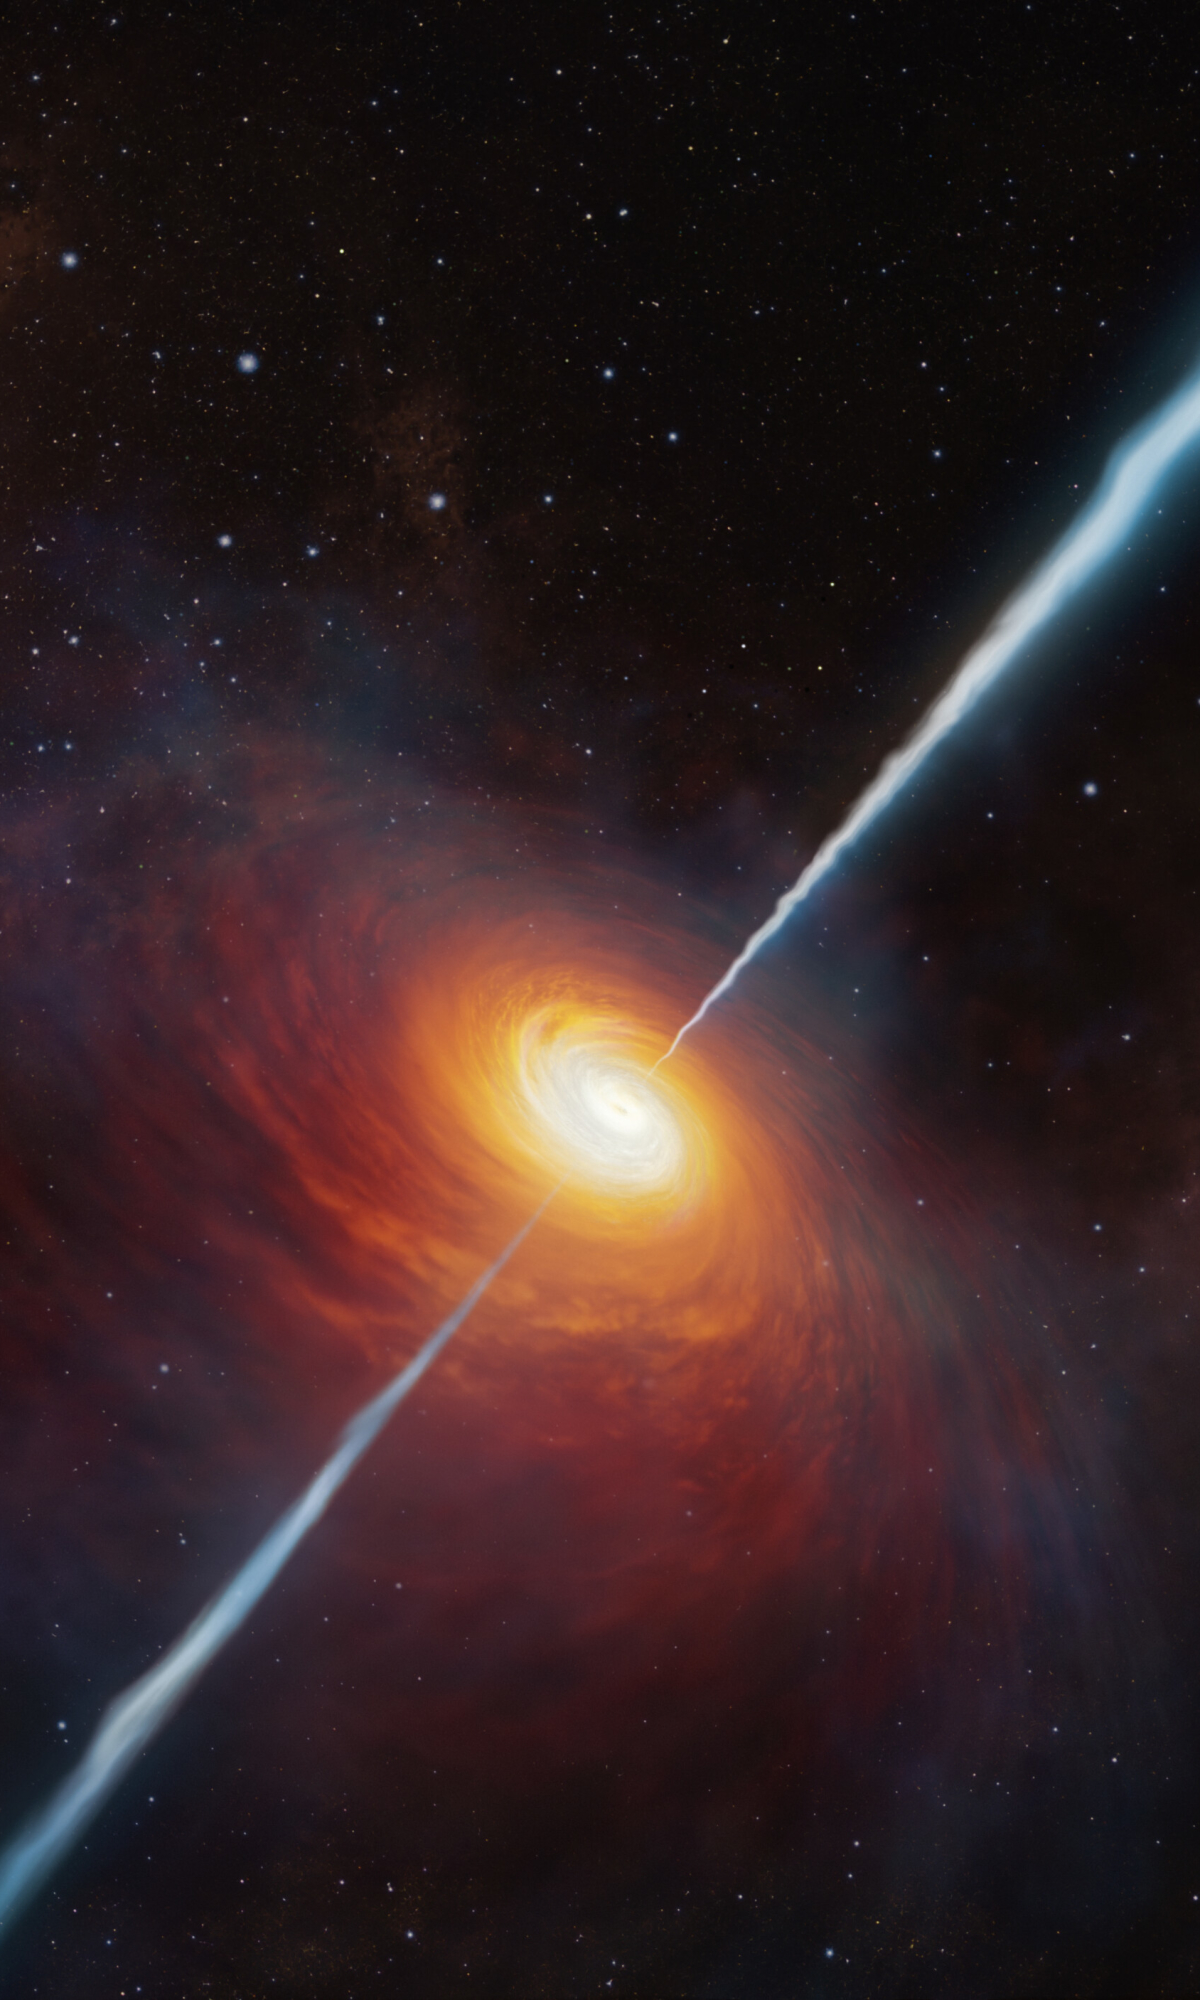 Artist’s rendering of quasar P172+18 by ESO